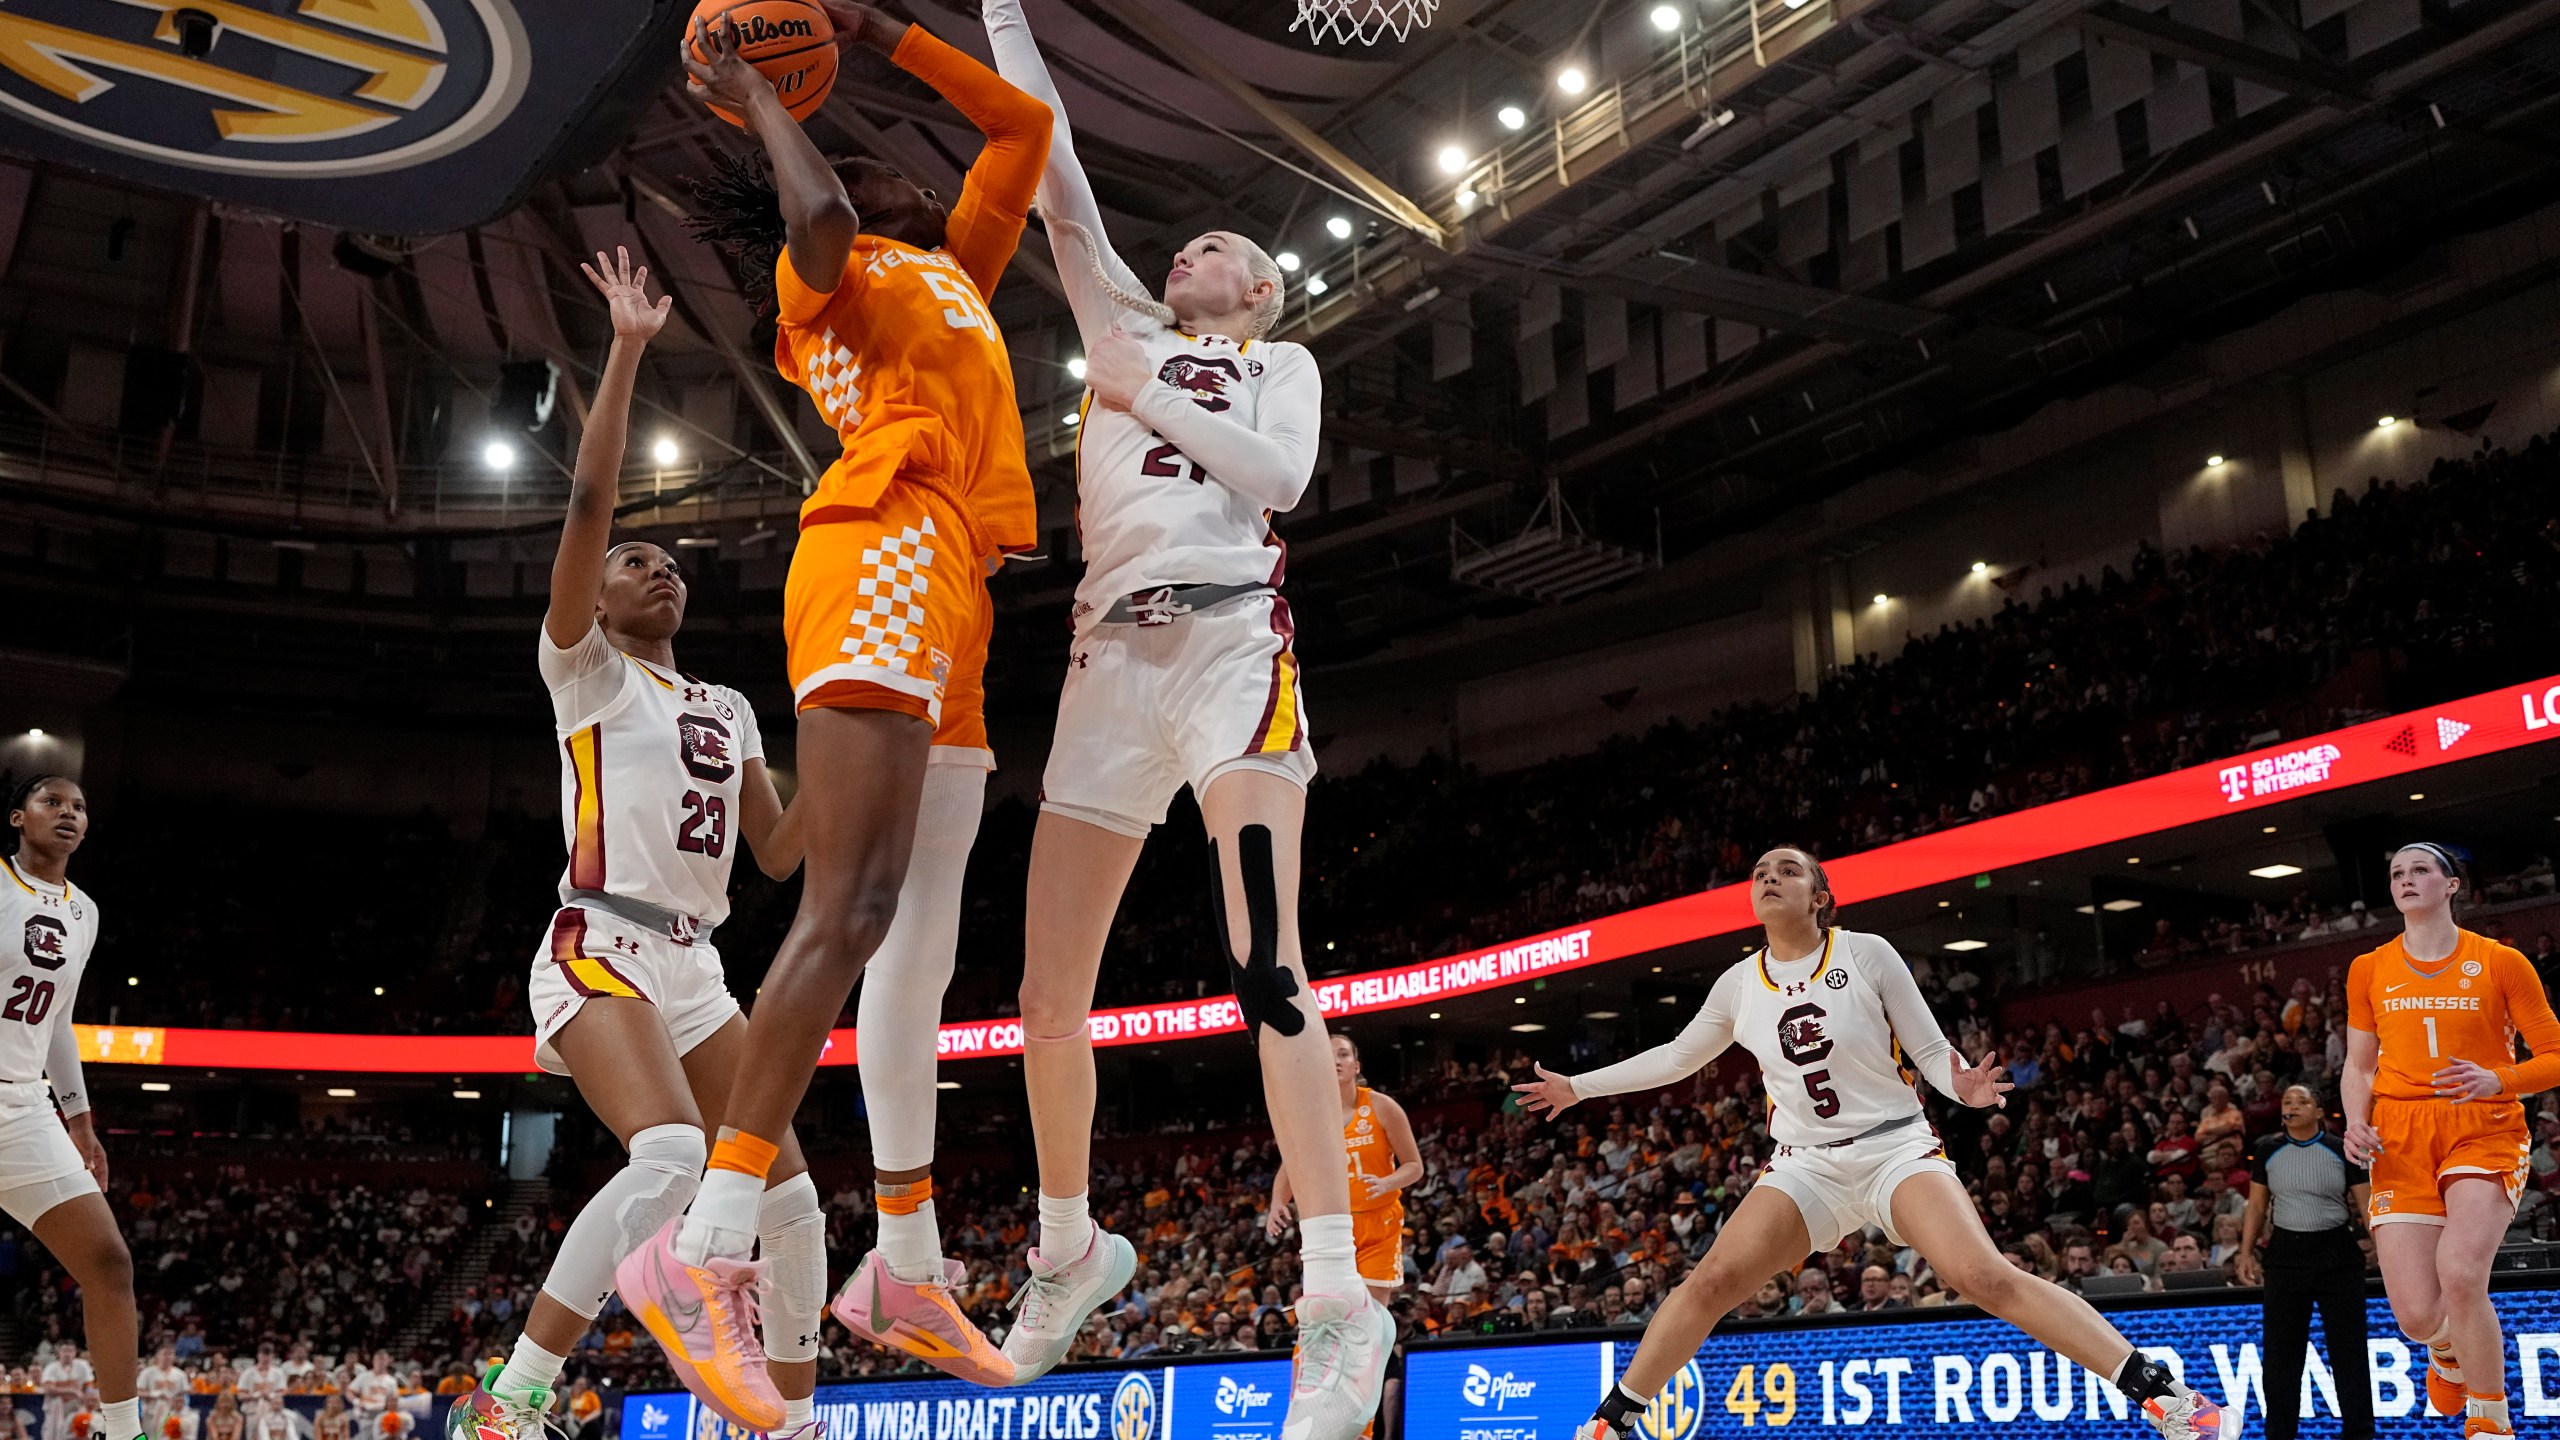 South Carolina forward Chloe Kitts (21) blocks a shot by Tennessee forward Jillian Hollingshead during the first half of an NCAA college basketball game at the Southeastern Conference women's tournament Saturday, March 9, 2024, in Greenville, S.C. (AP Photo/Chris Carlson)